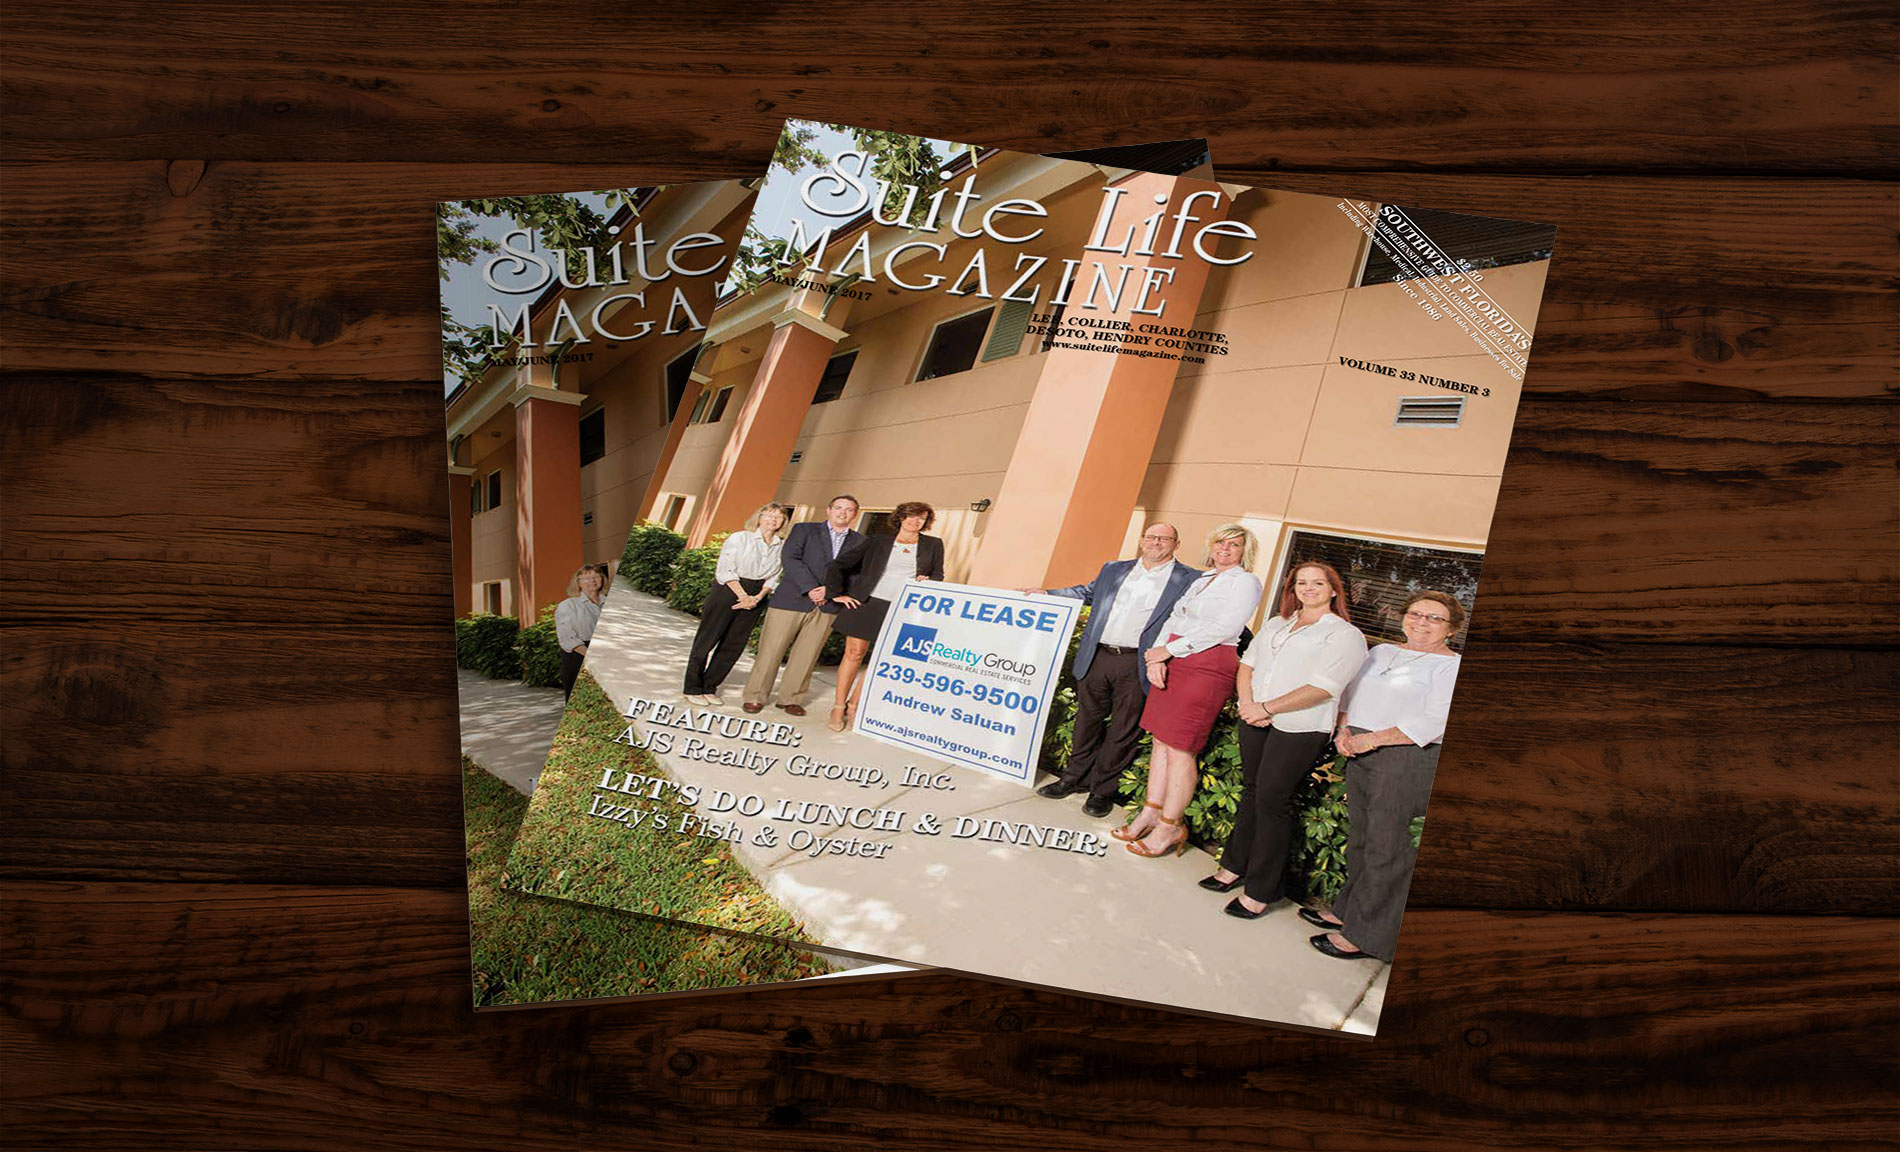 AJS Realty Group Featured in Suite Life Magazine